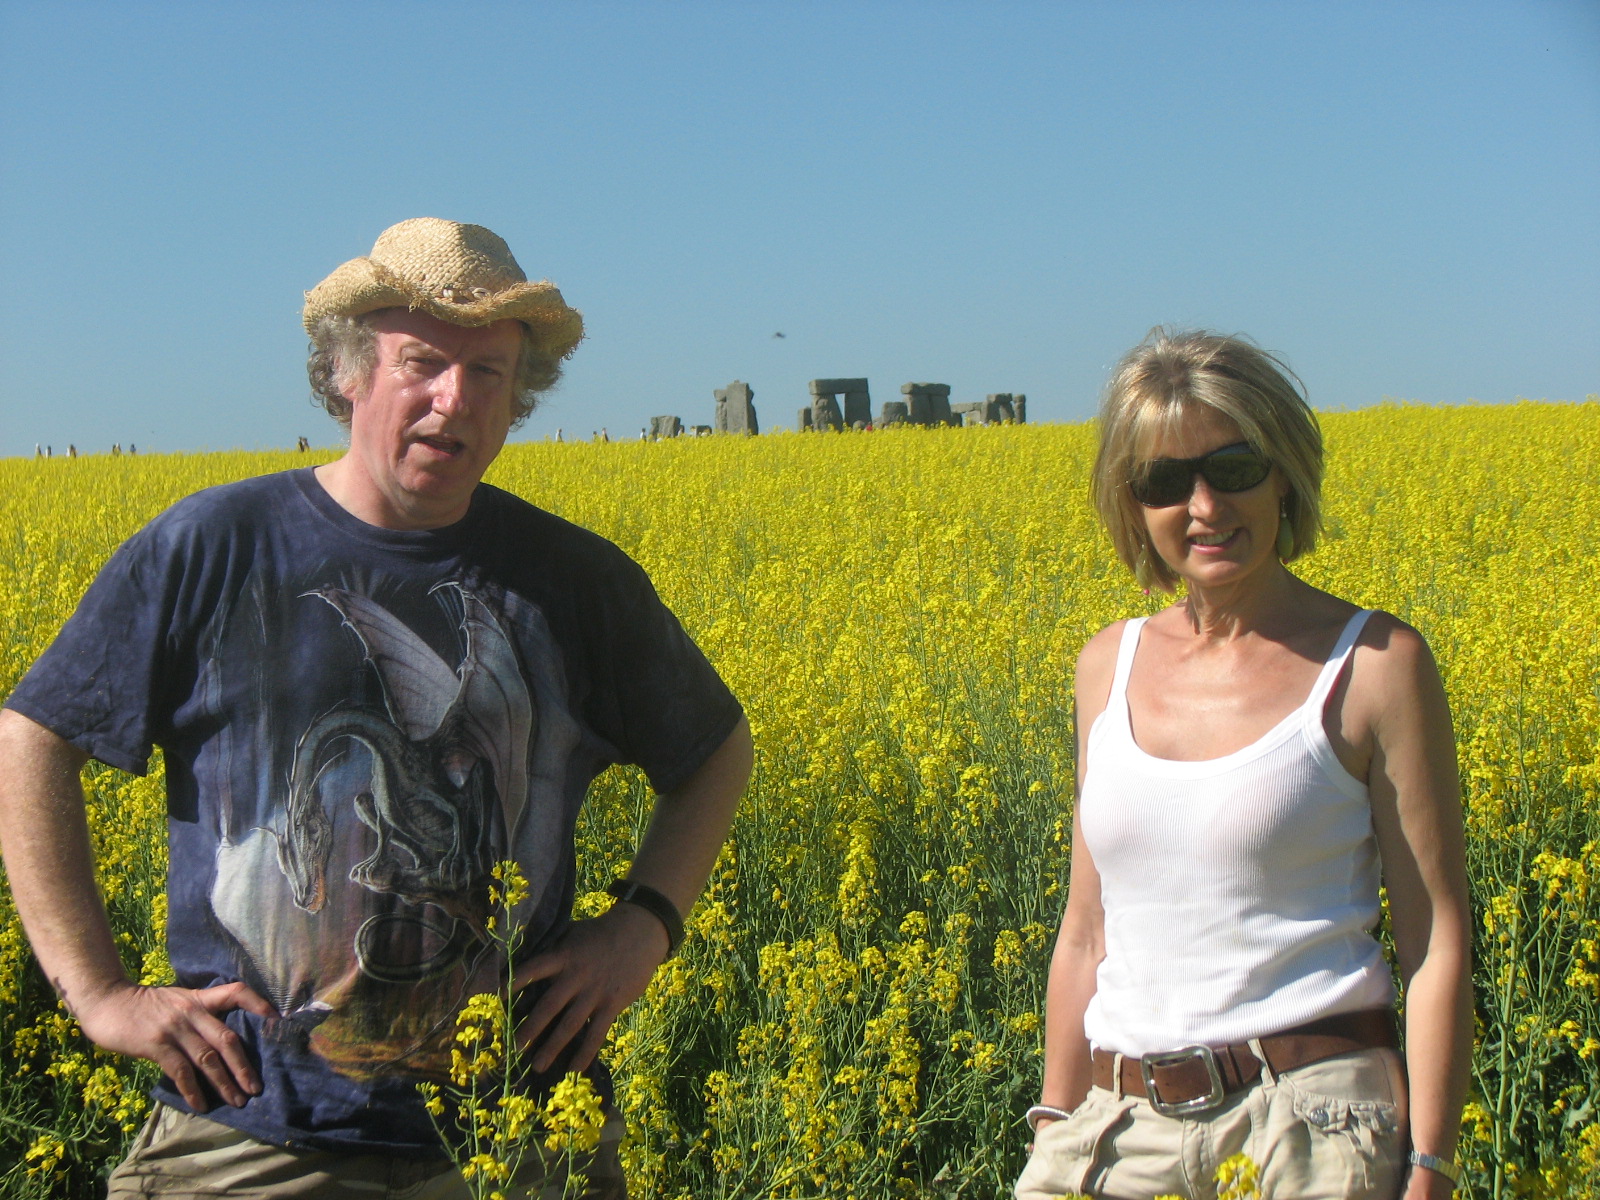 Miles Johnston with Vicky Angel at Stonehenge crop circle, June 2010, during a Bases project crop circle shoot.